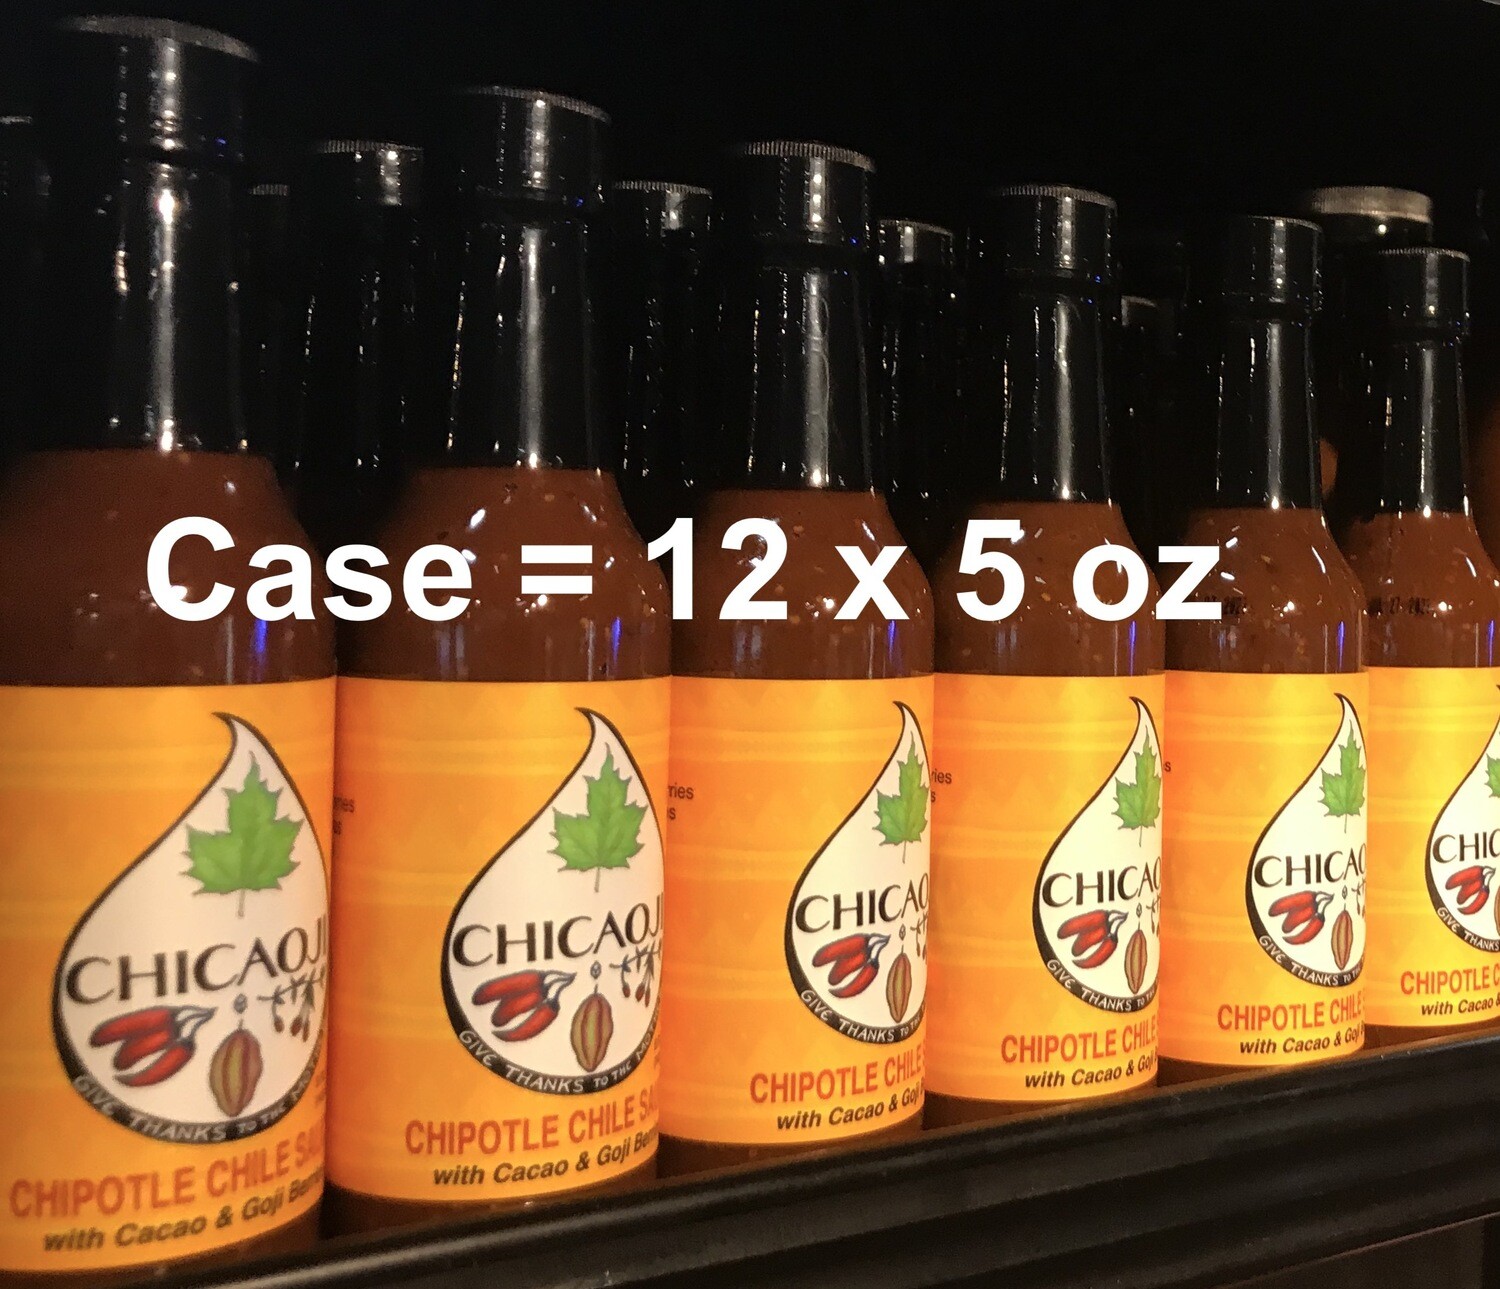 Case: 12 x 5 oz Chicaoji. Flat rate shipping $10 available.